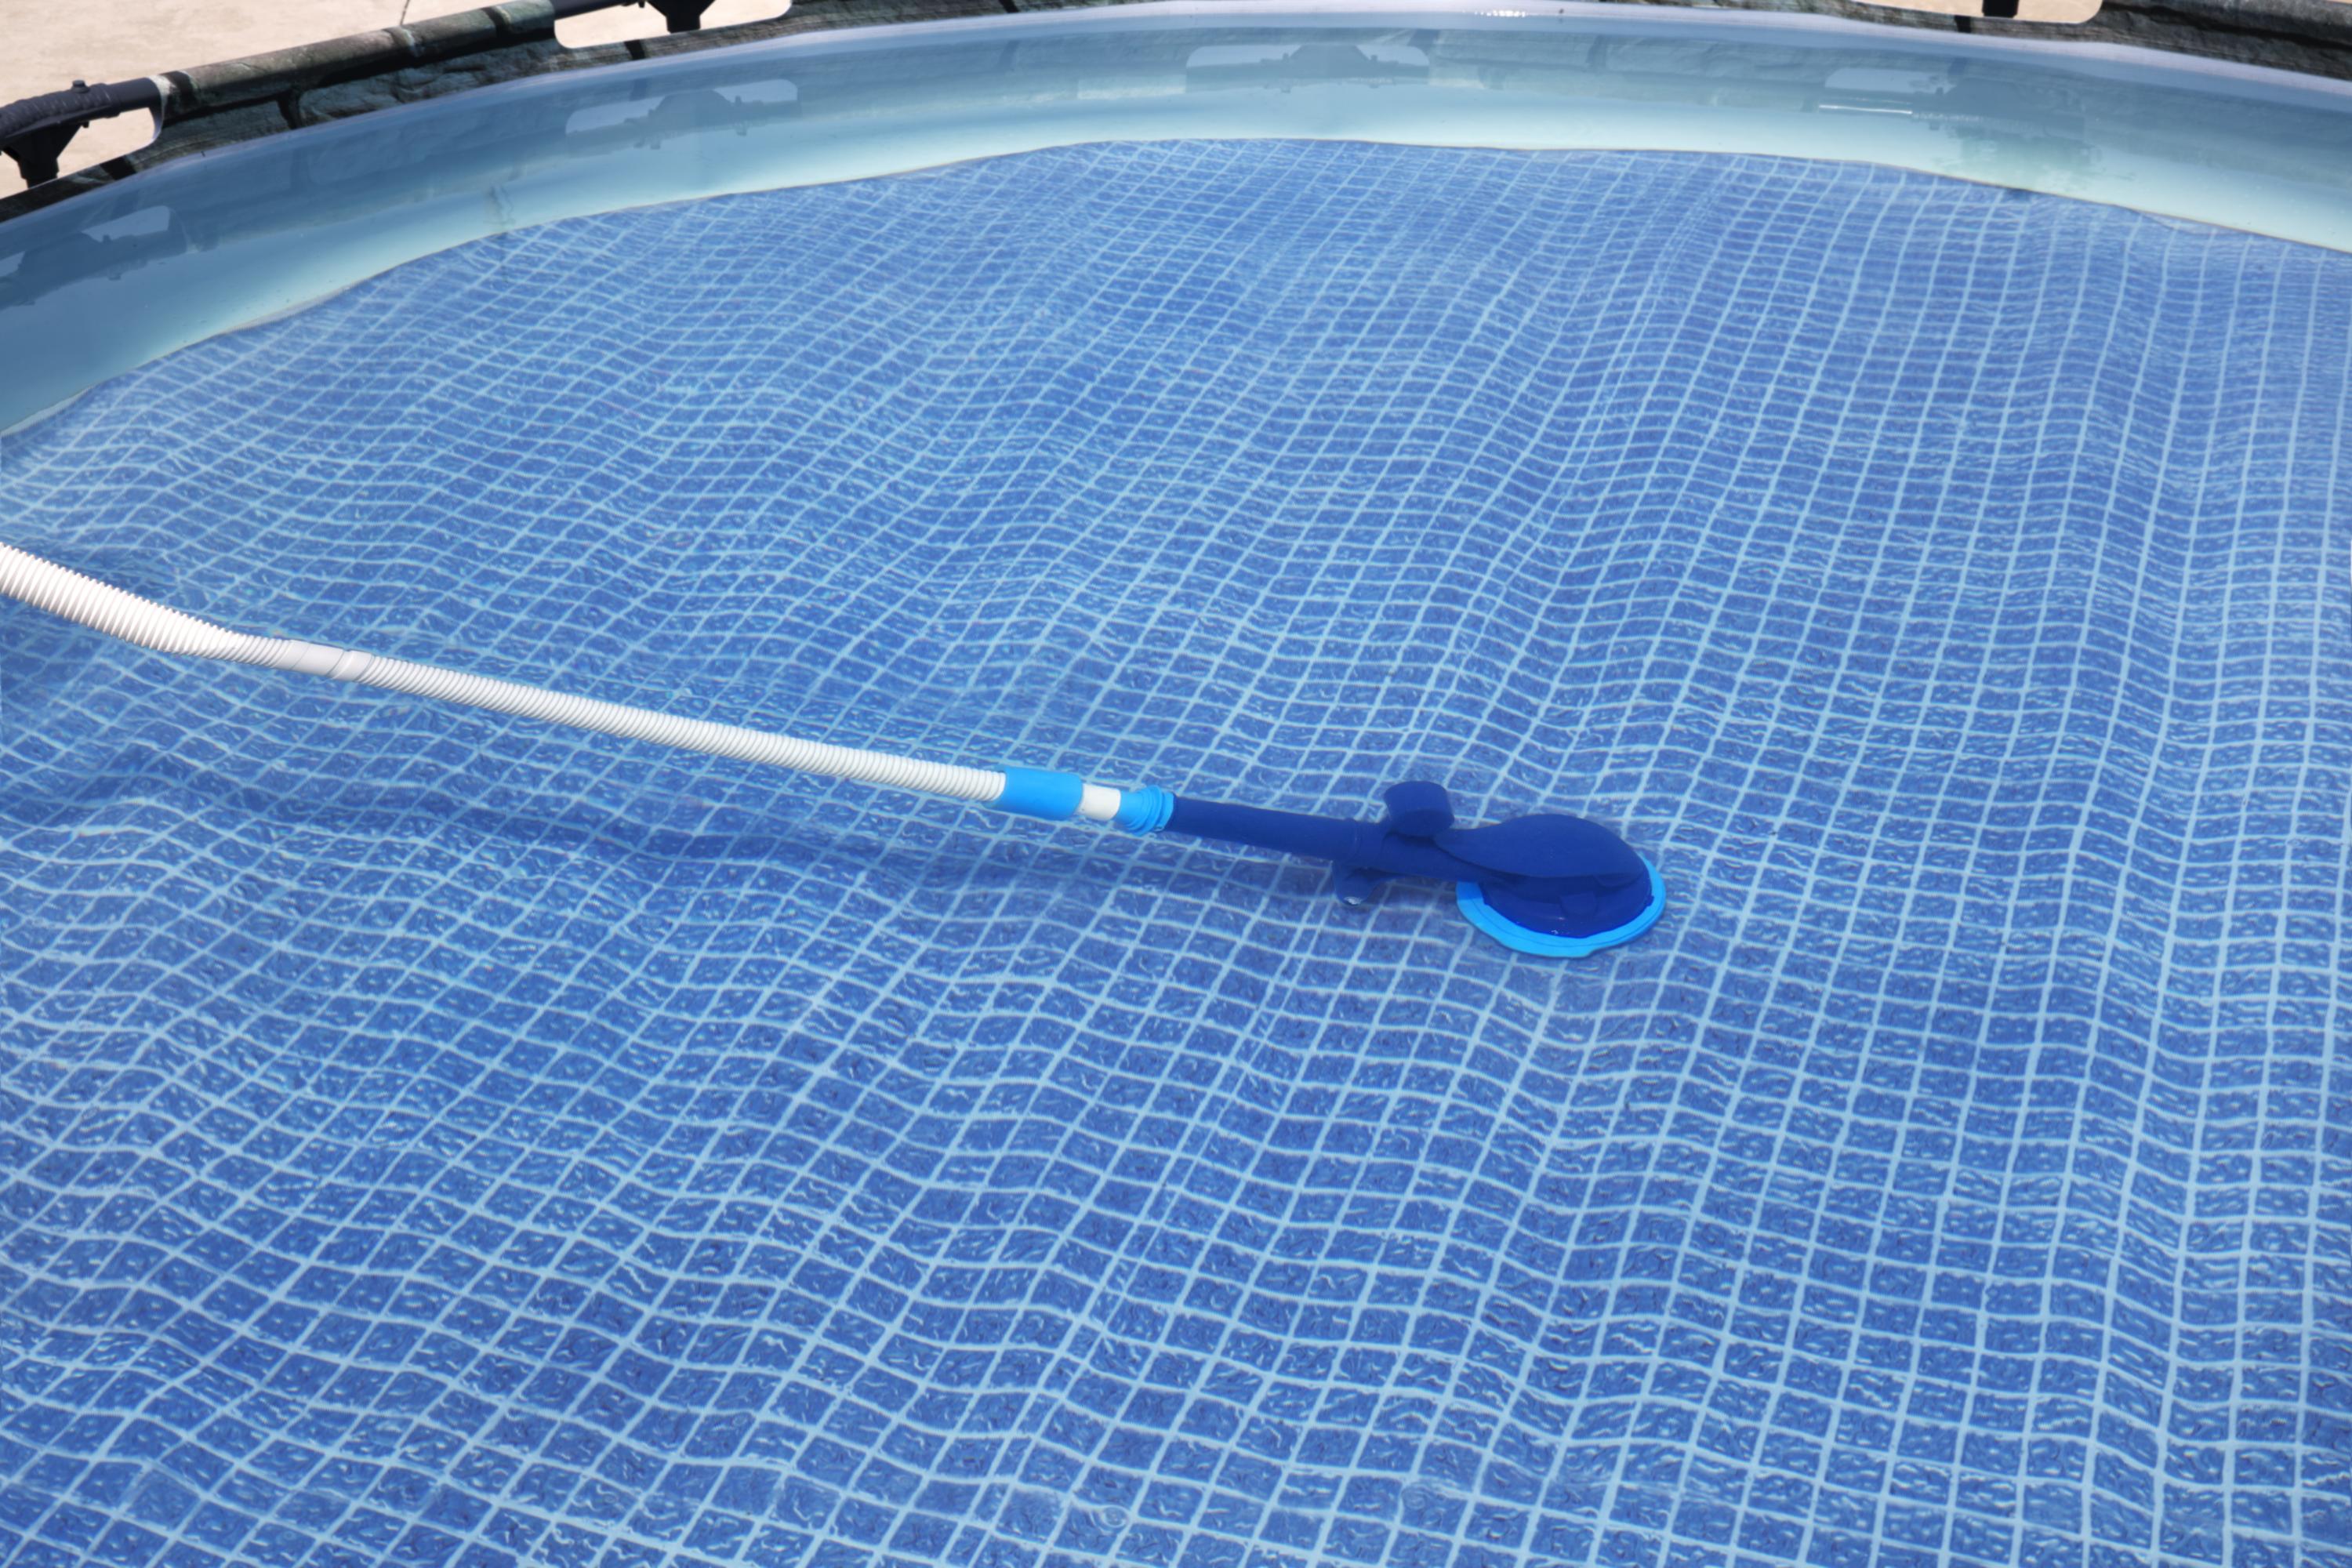 Flowclear AquaClimb Automatic Water-Powered Above Ground Pool Cleaning Vacuum - image 2 of 10